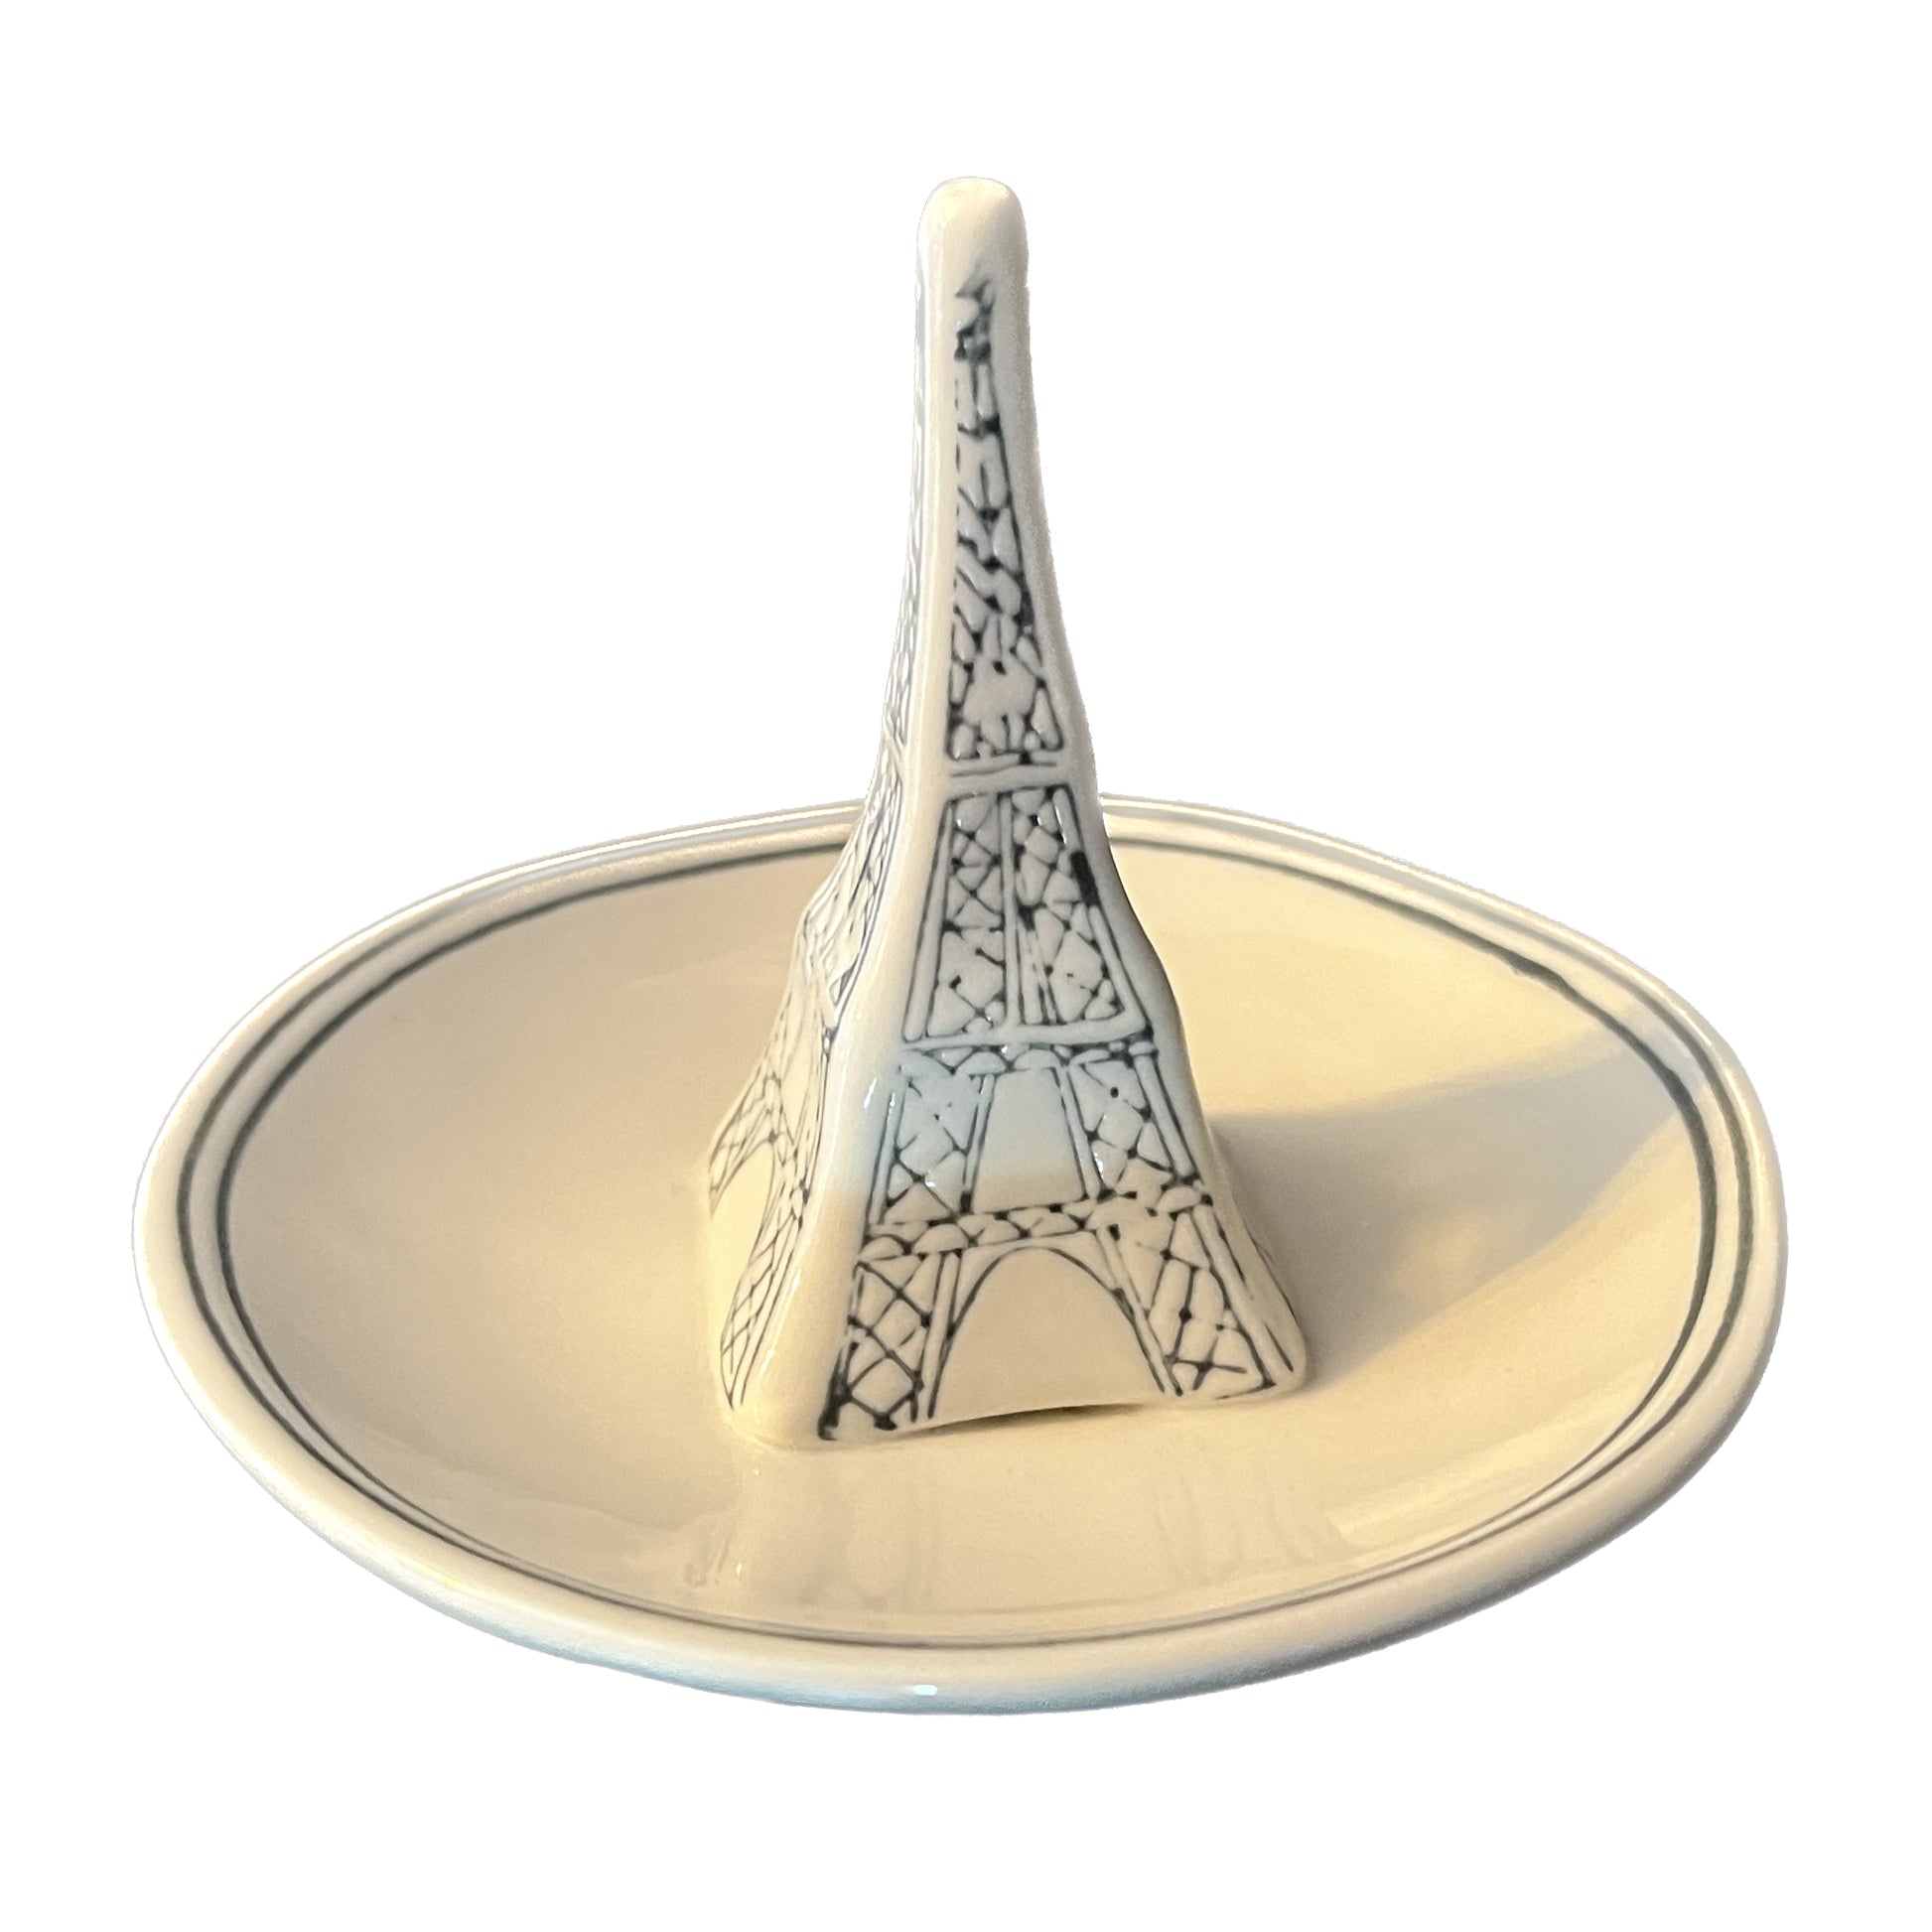 Molly Hatch Eiffel Tower Ring Holder - Crystal Conner Design